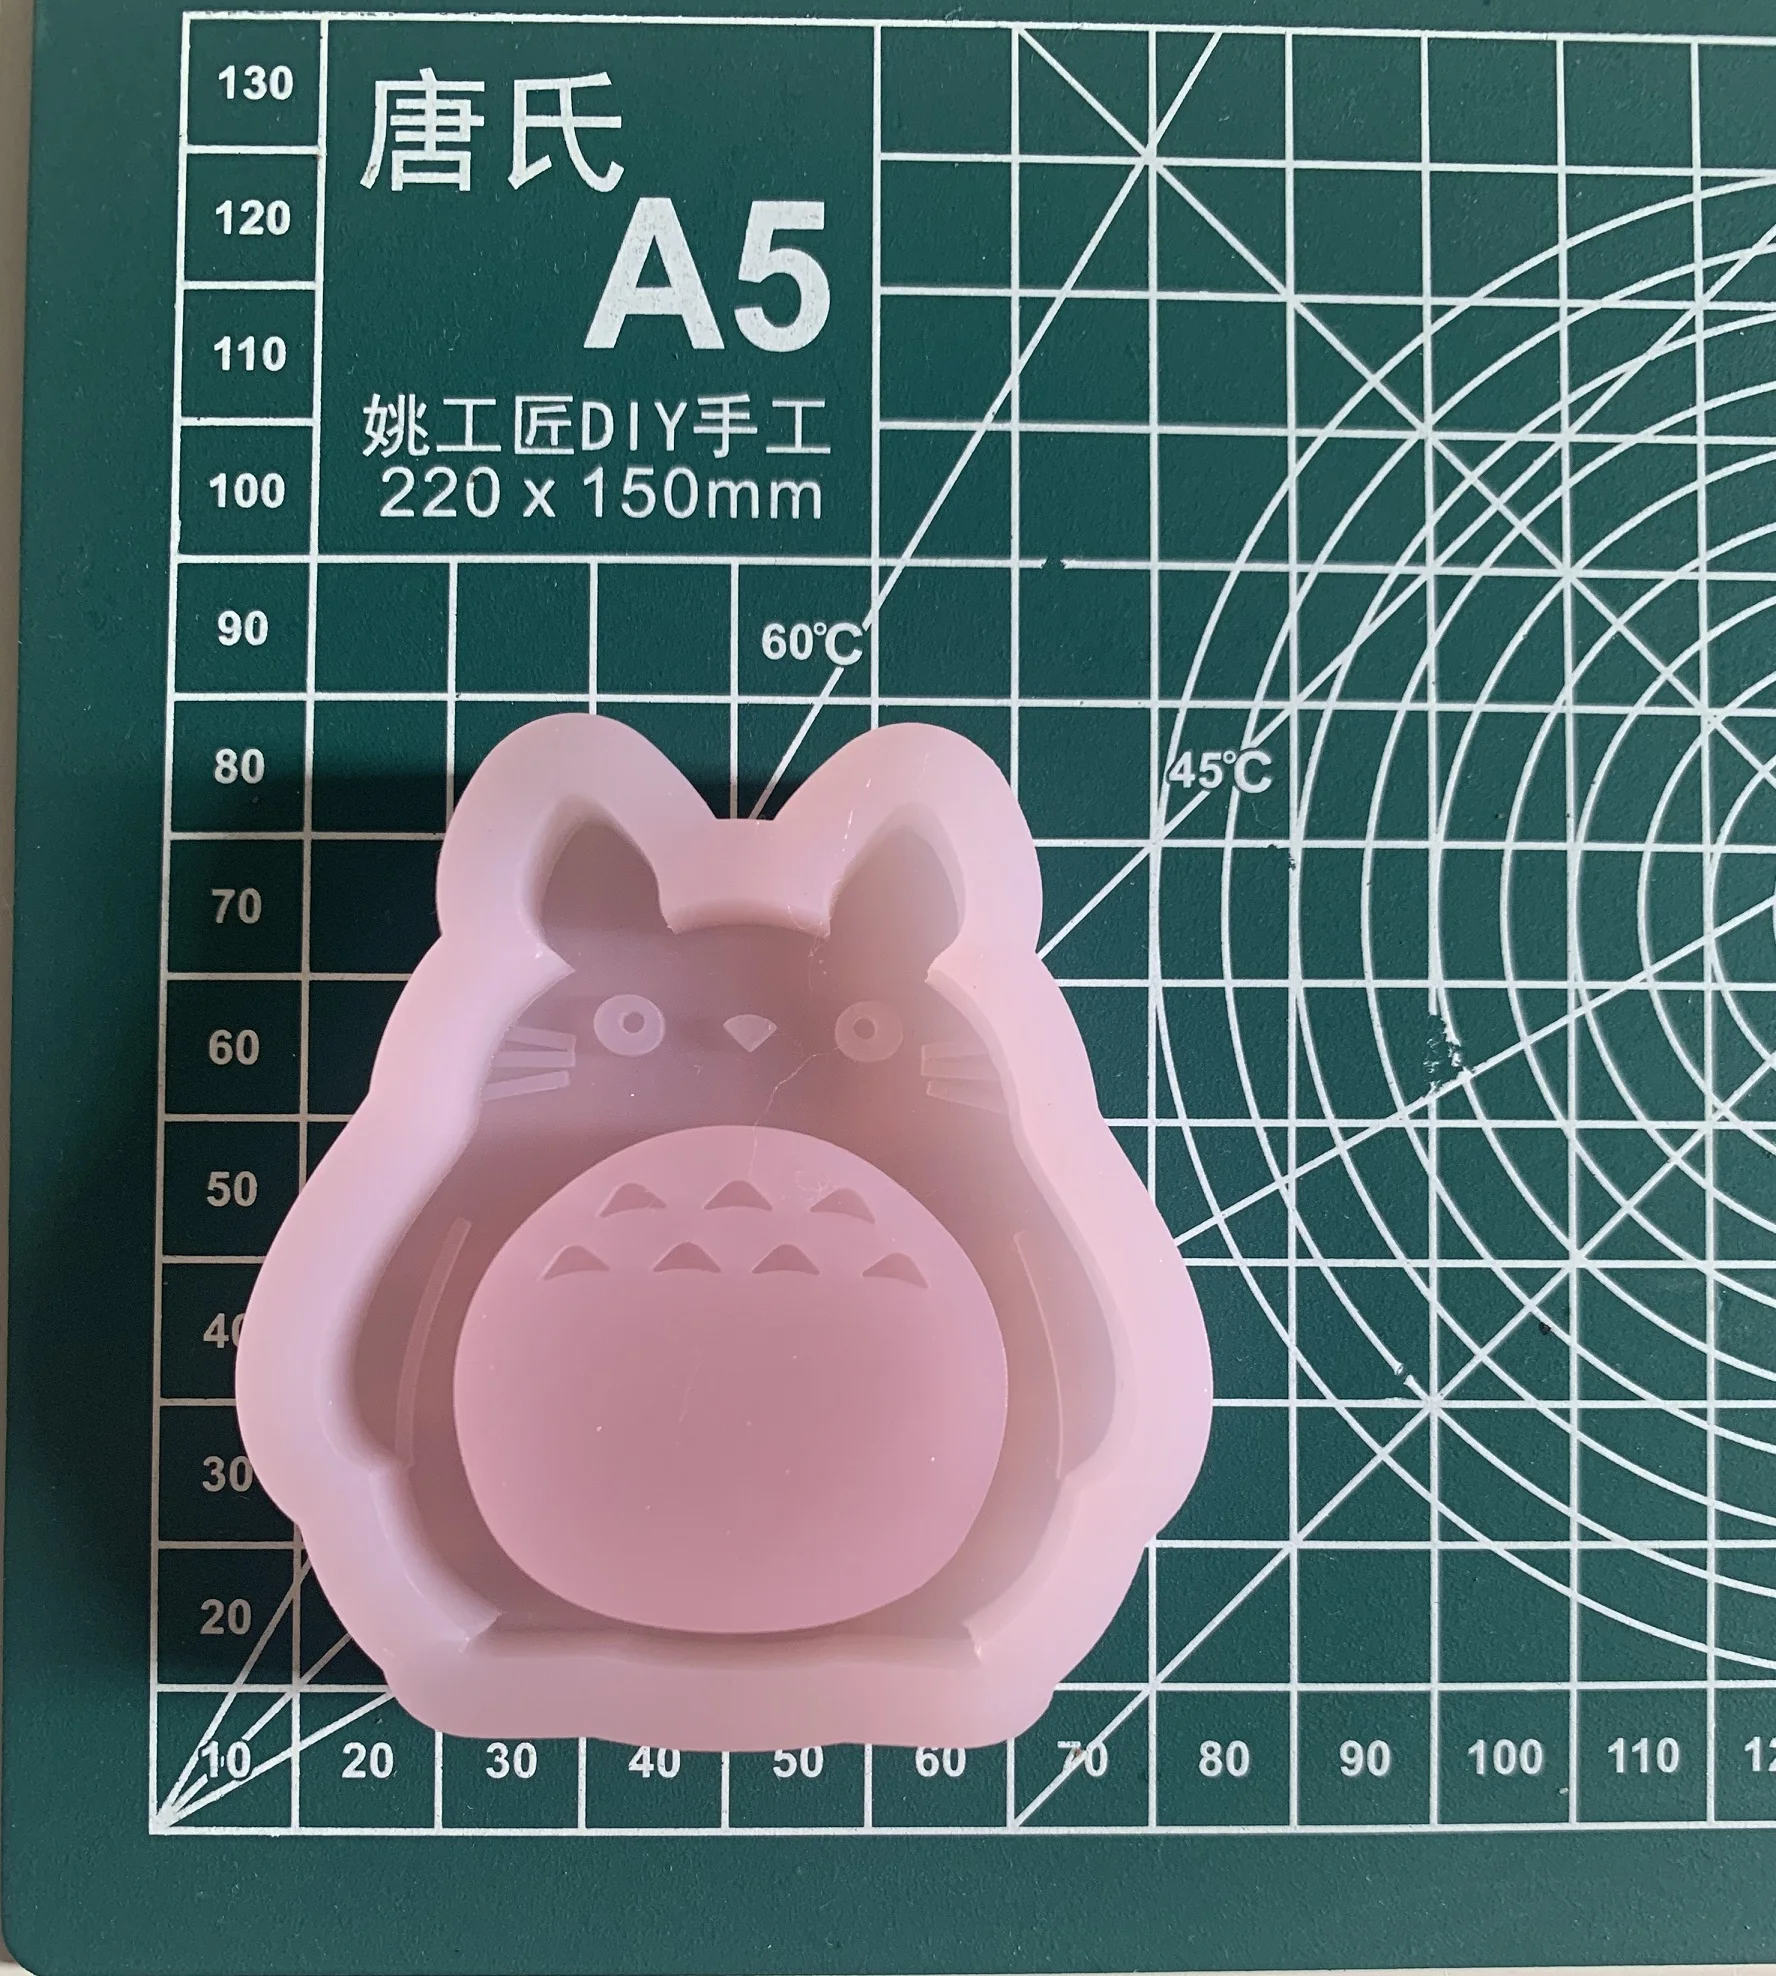 wsy-147 cartoon cat quicksand mold resin shaker mold silicone mold handmade replication mould